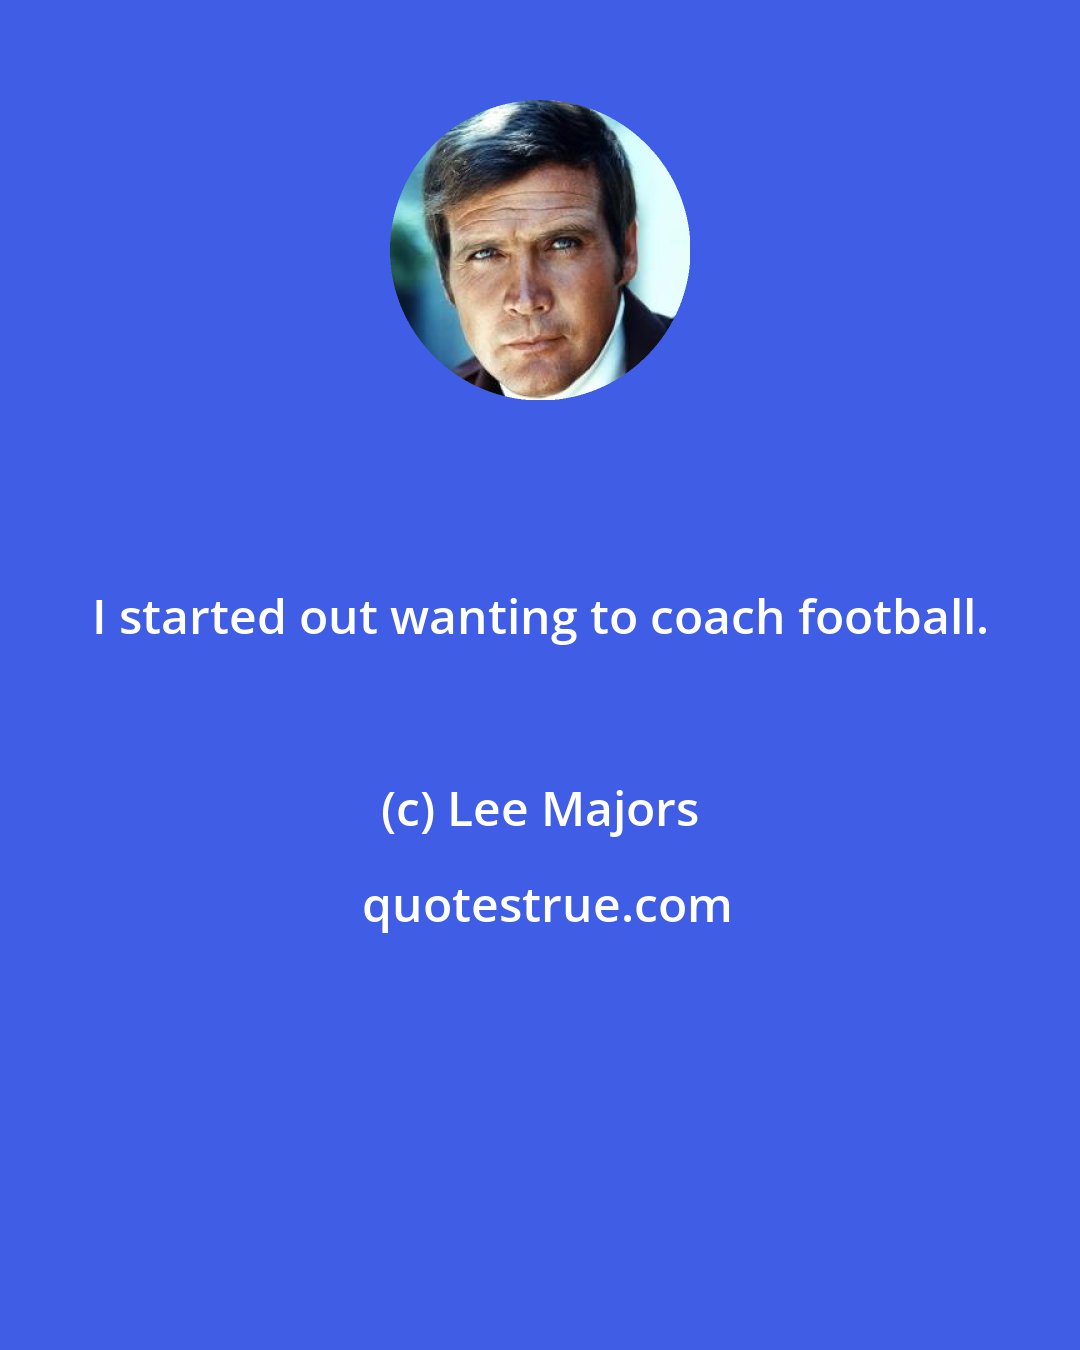 Lee Majors: I started out wanting to coach football.